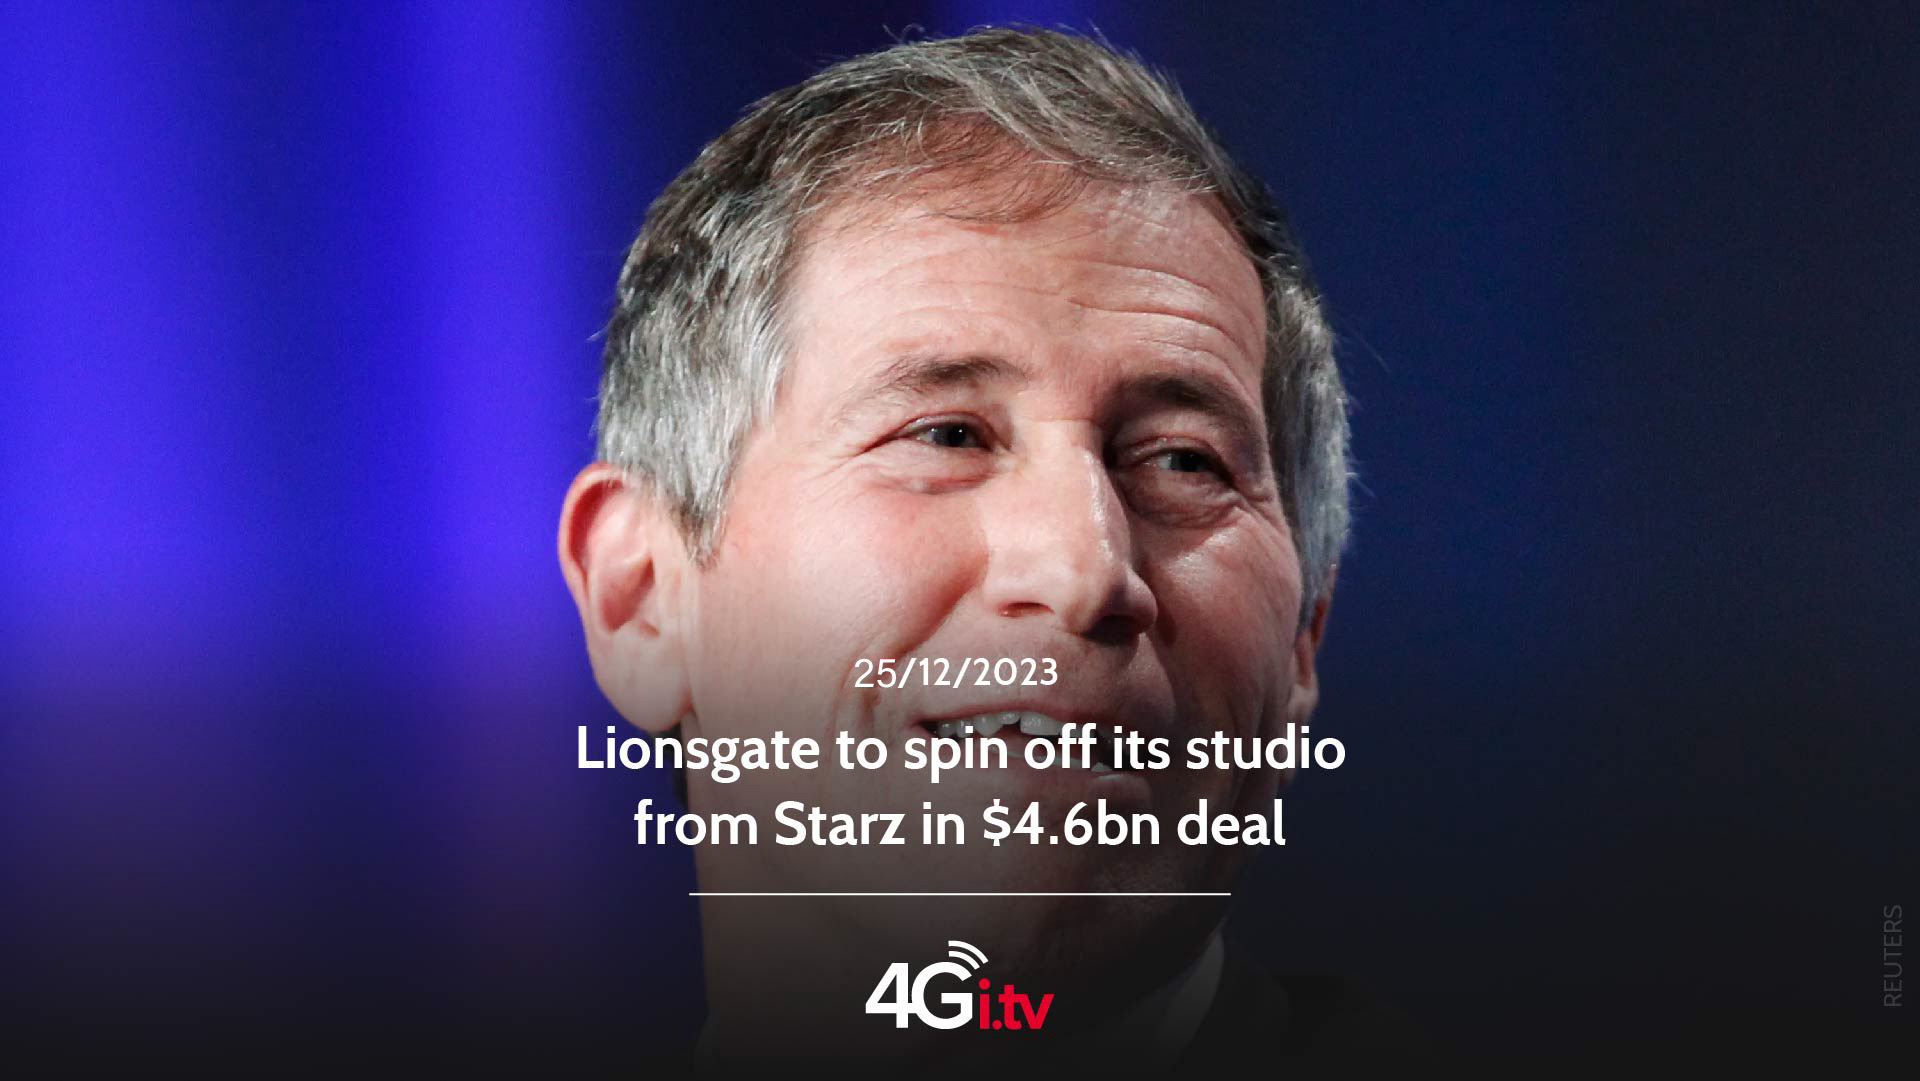 Подробнее о статье Lionsgate to spin off its studio from Starz in $4.6bn deal